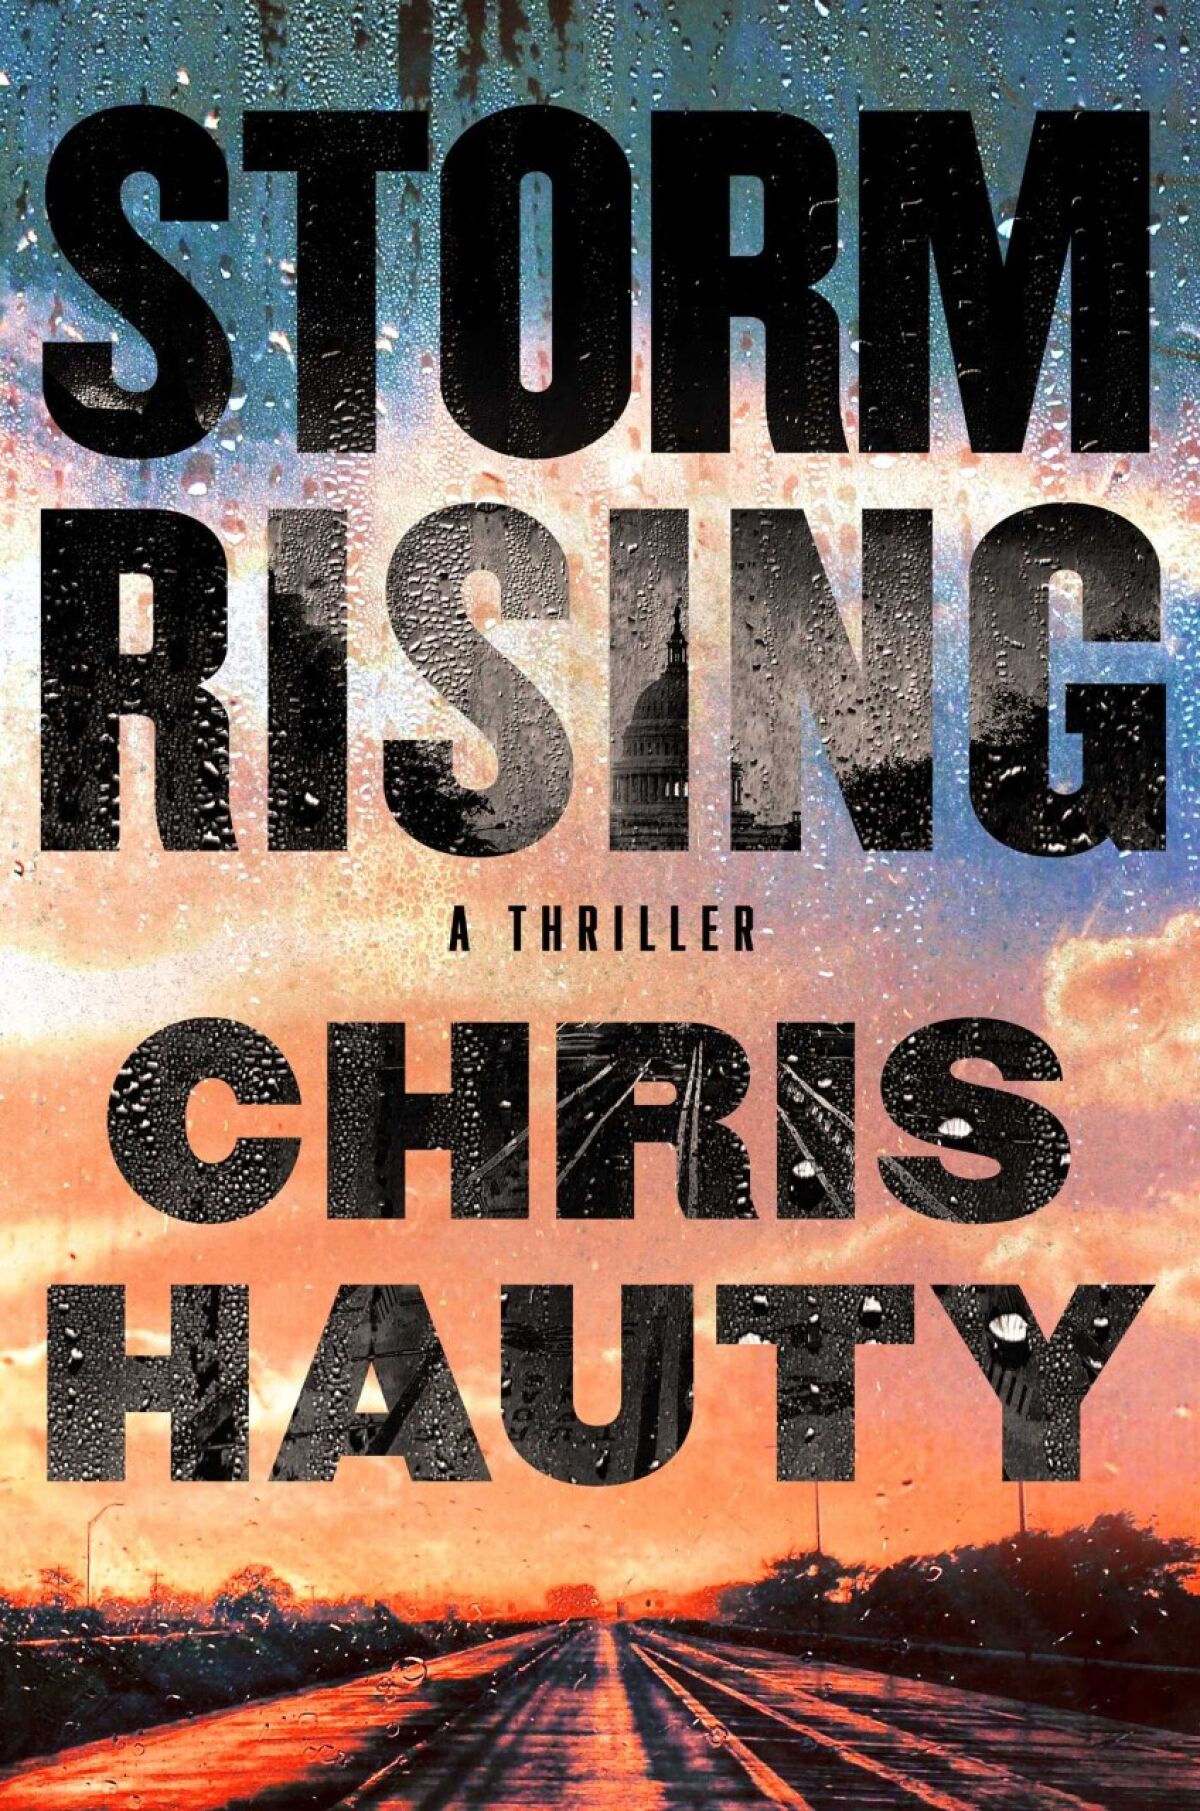 The cover of "Storm Rising" by Chris Hauty